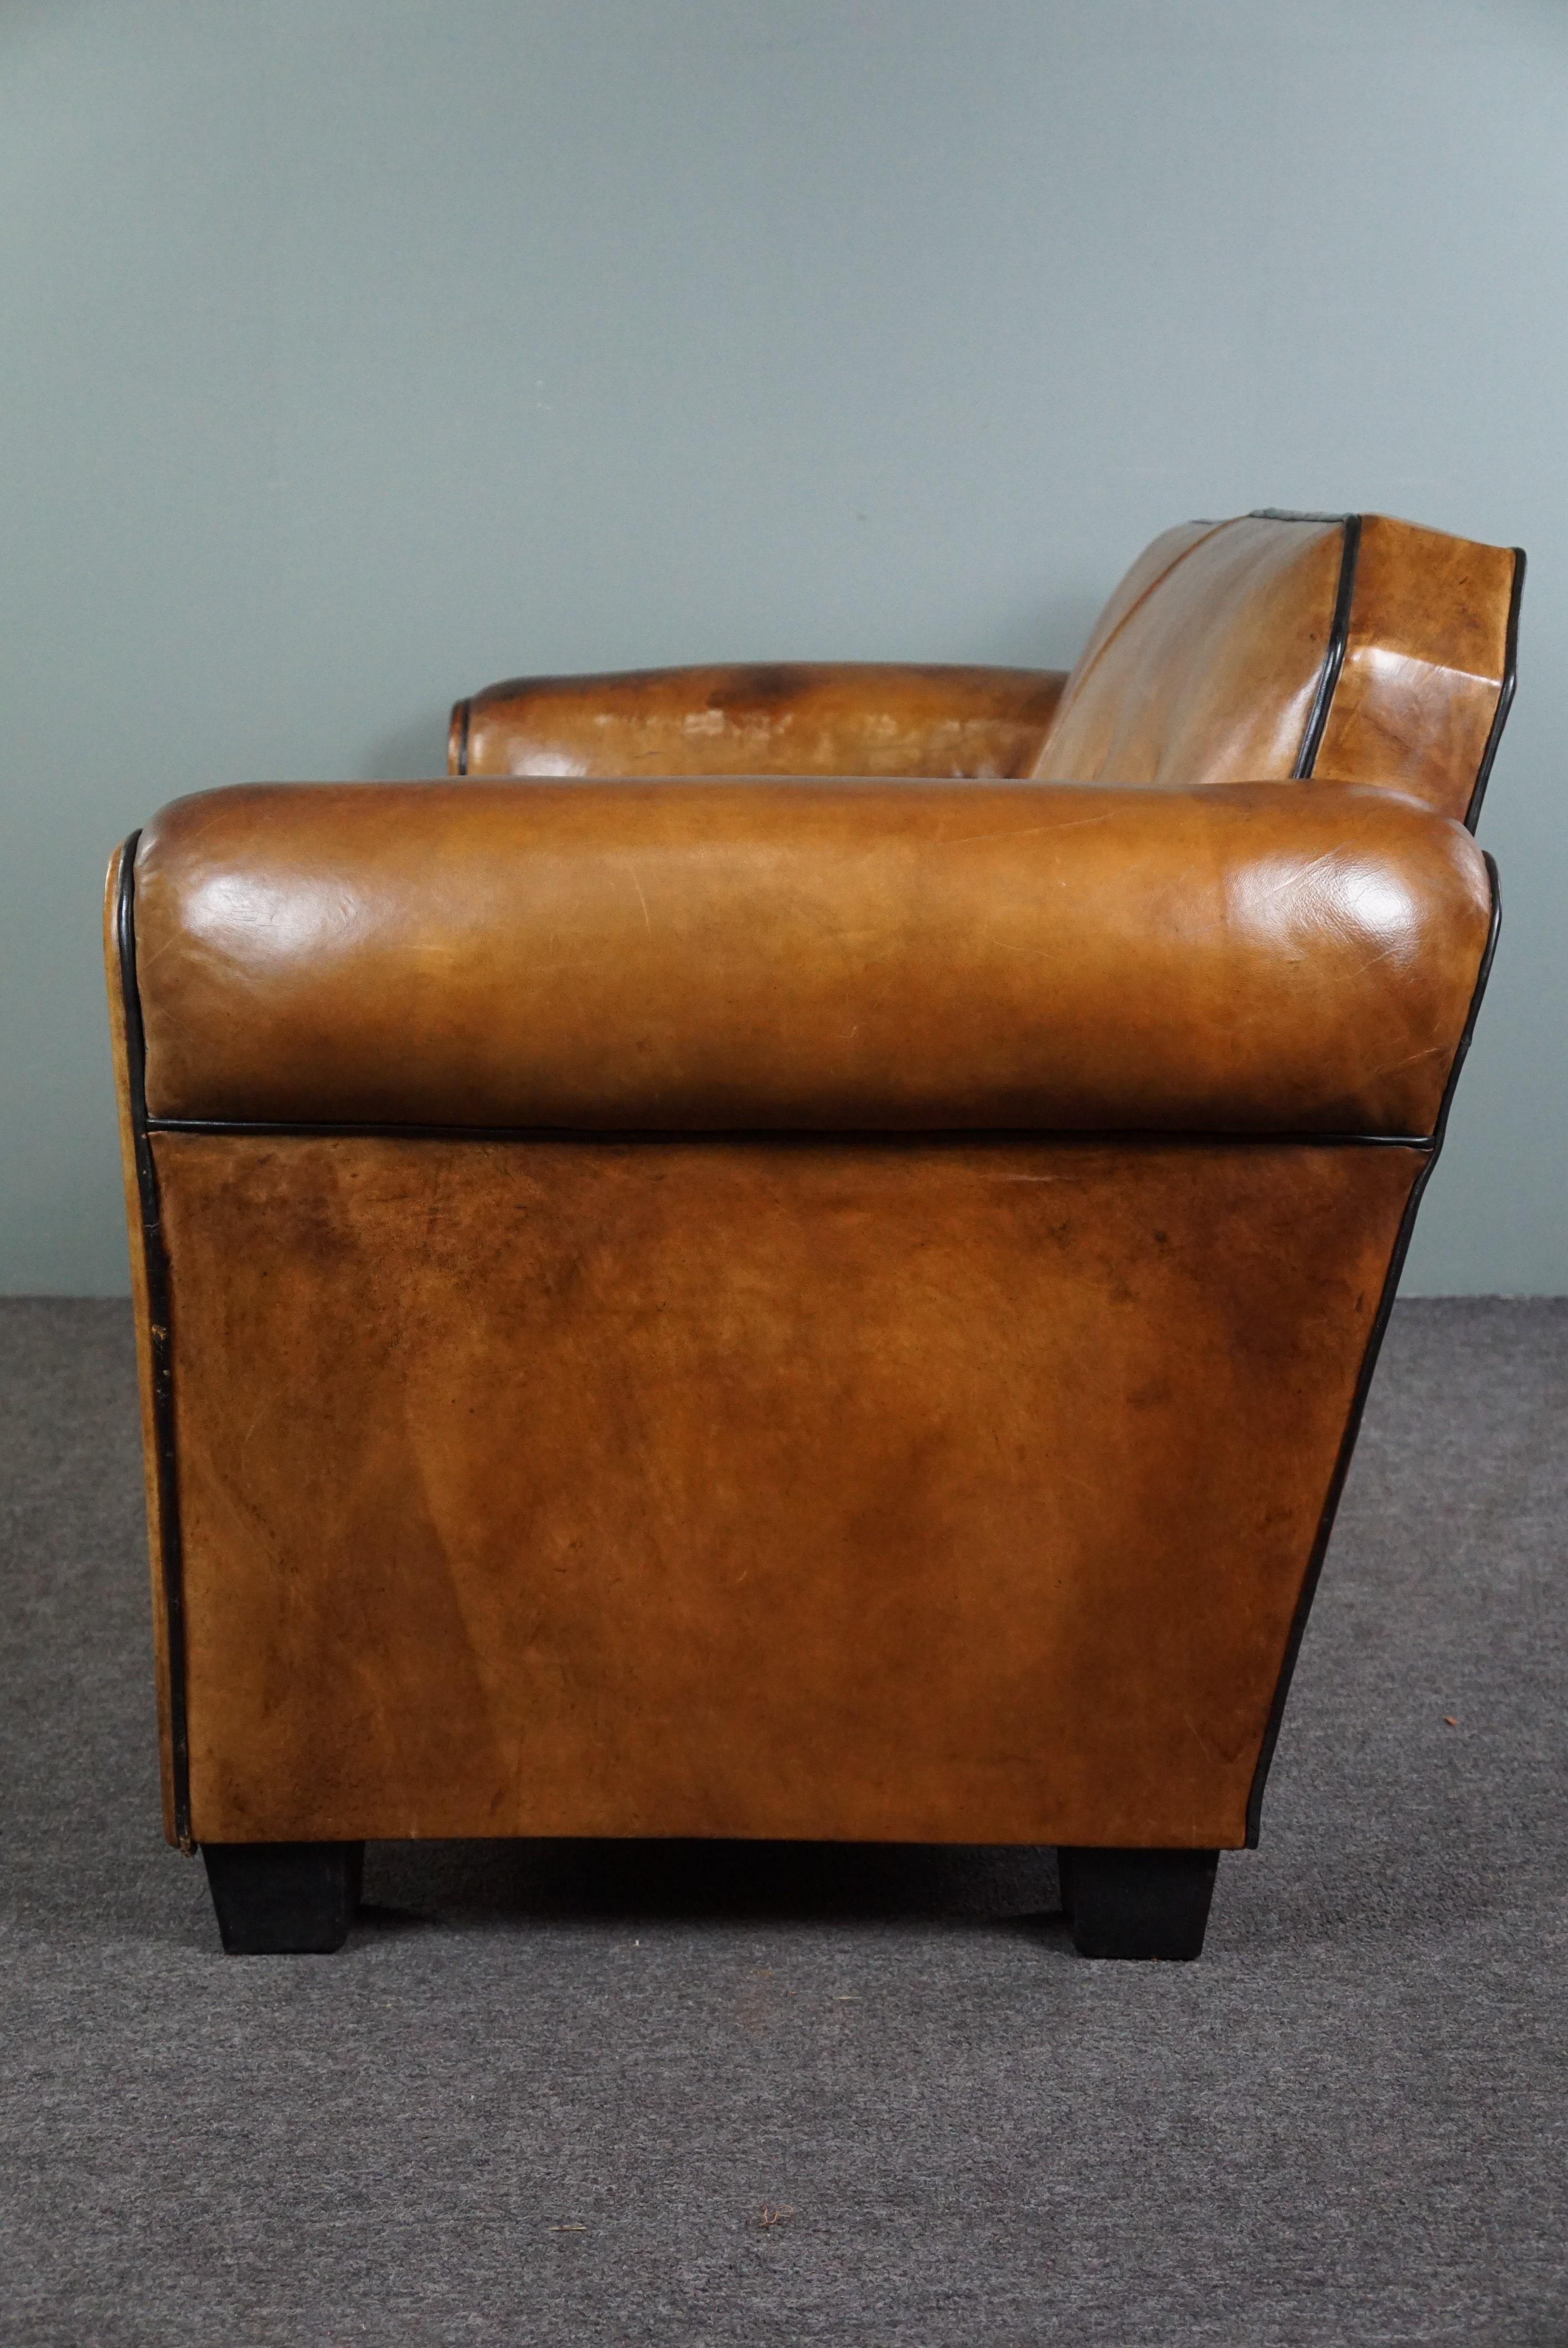 Dutch Sheep leather Art Deco sofa designed by Bart Van Bekhoven, spacious 2 seater For Sale